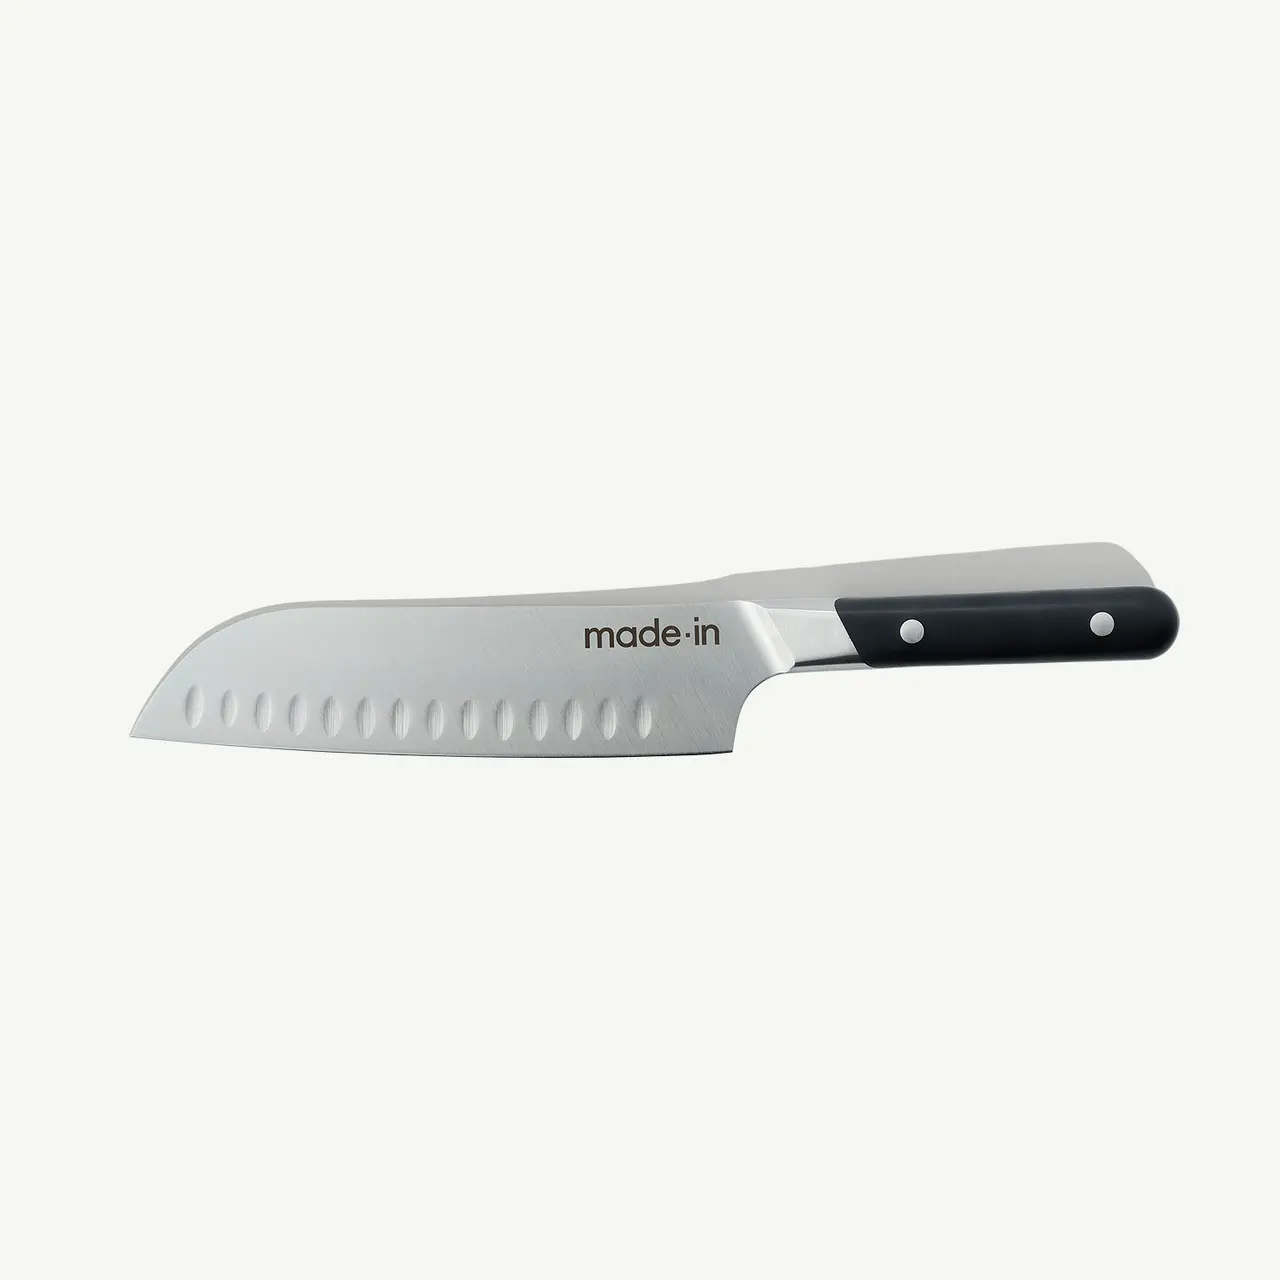 A stainless steel Santoku kitchen knife with a black handle is displayed against a white background.